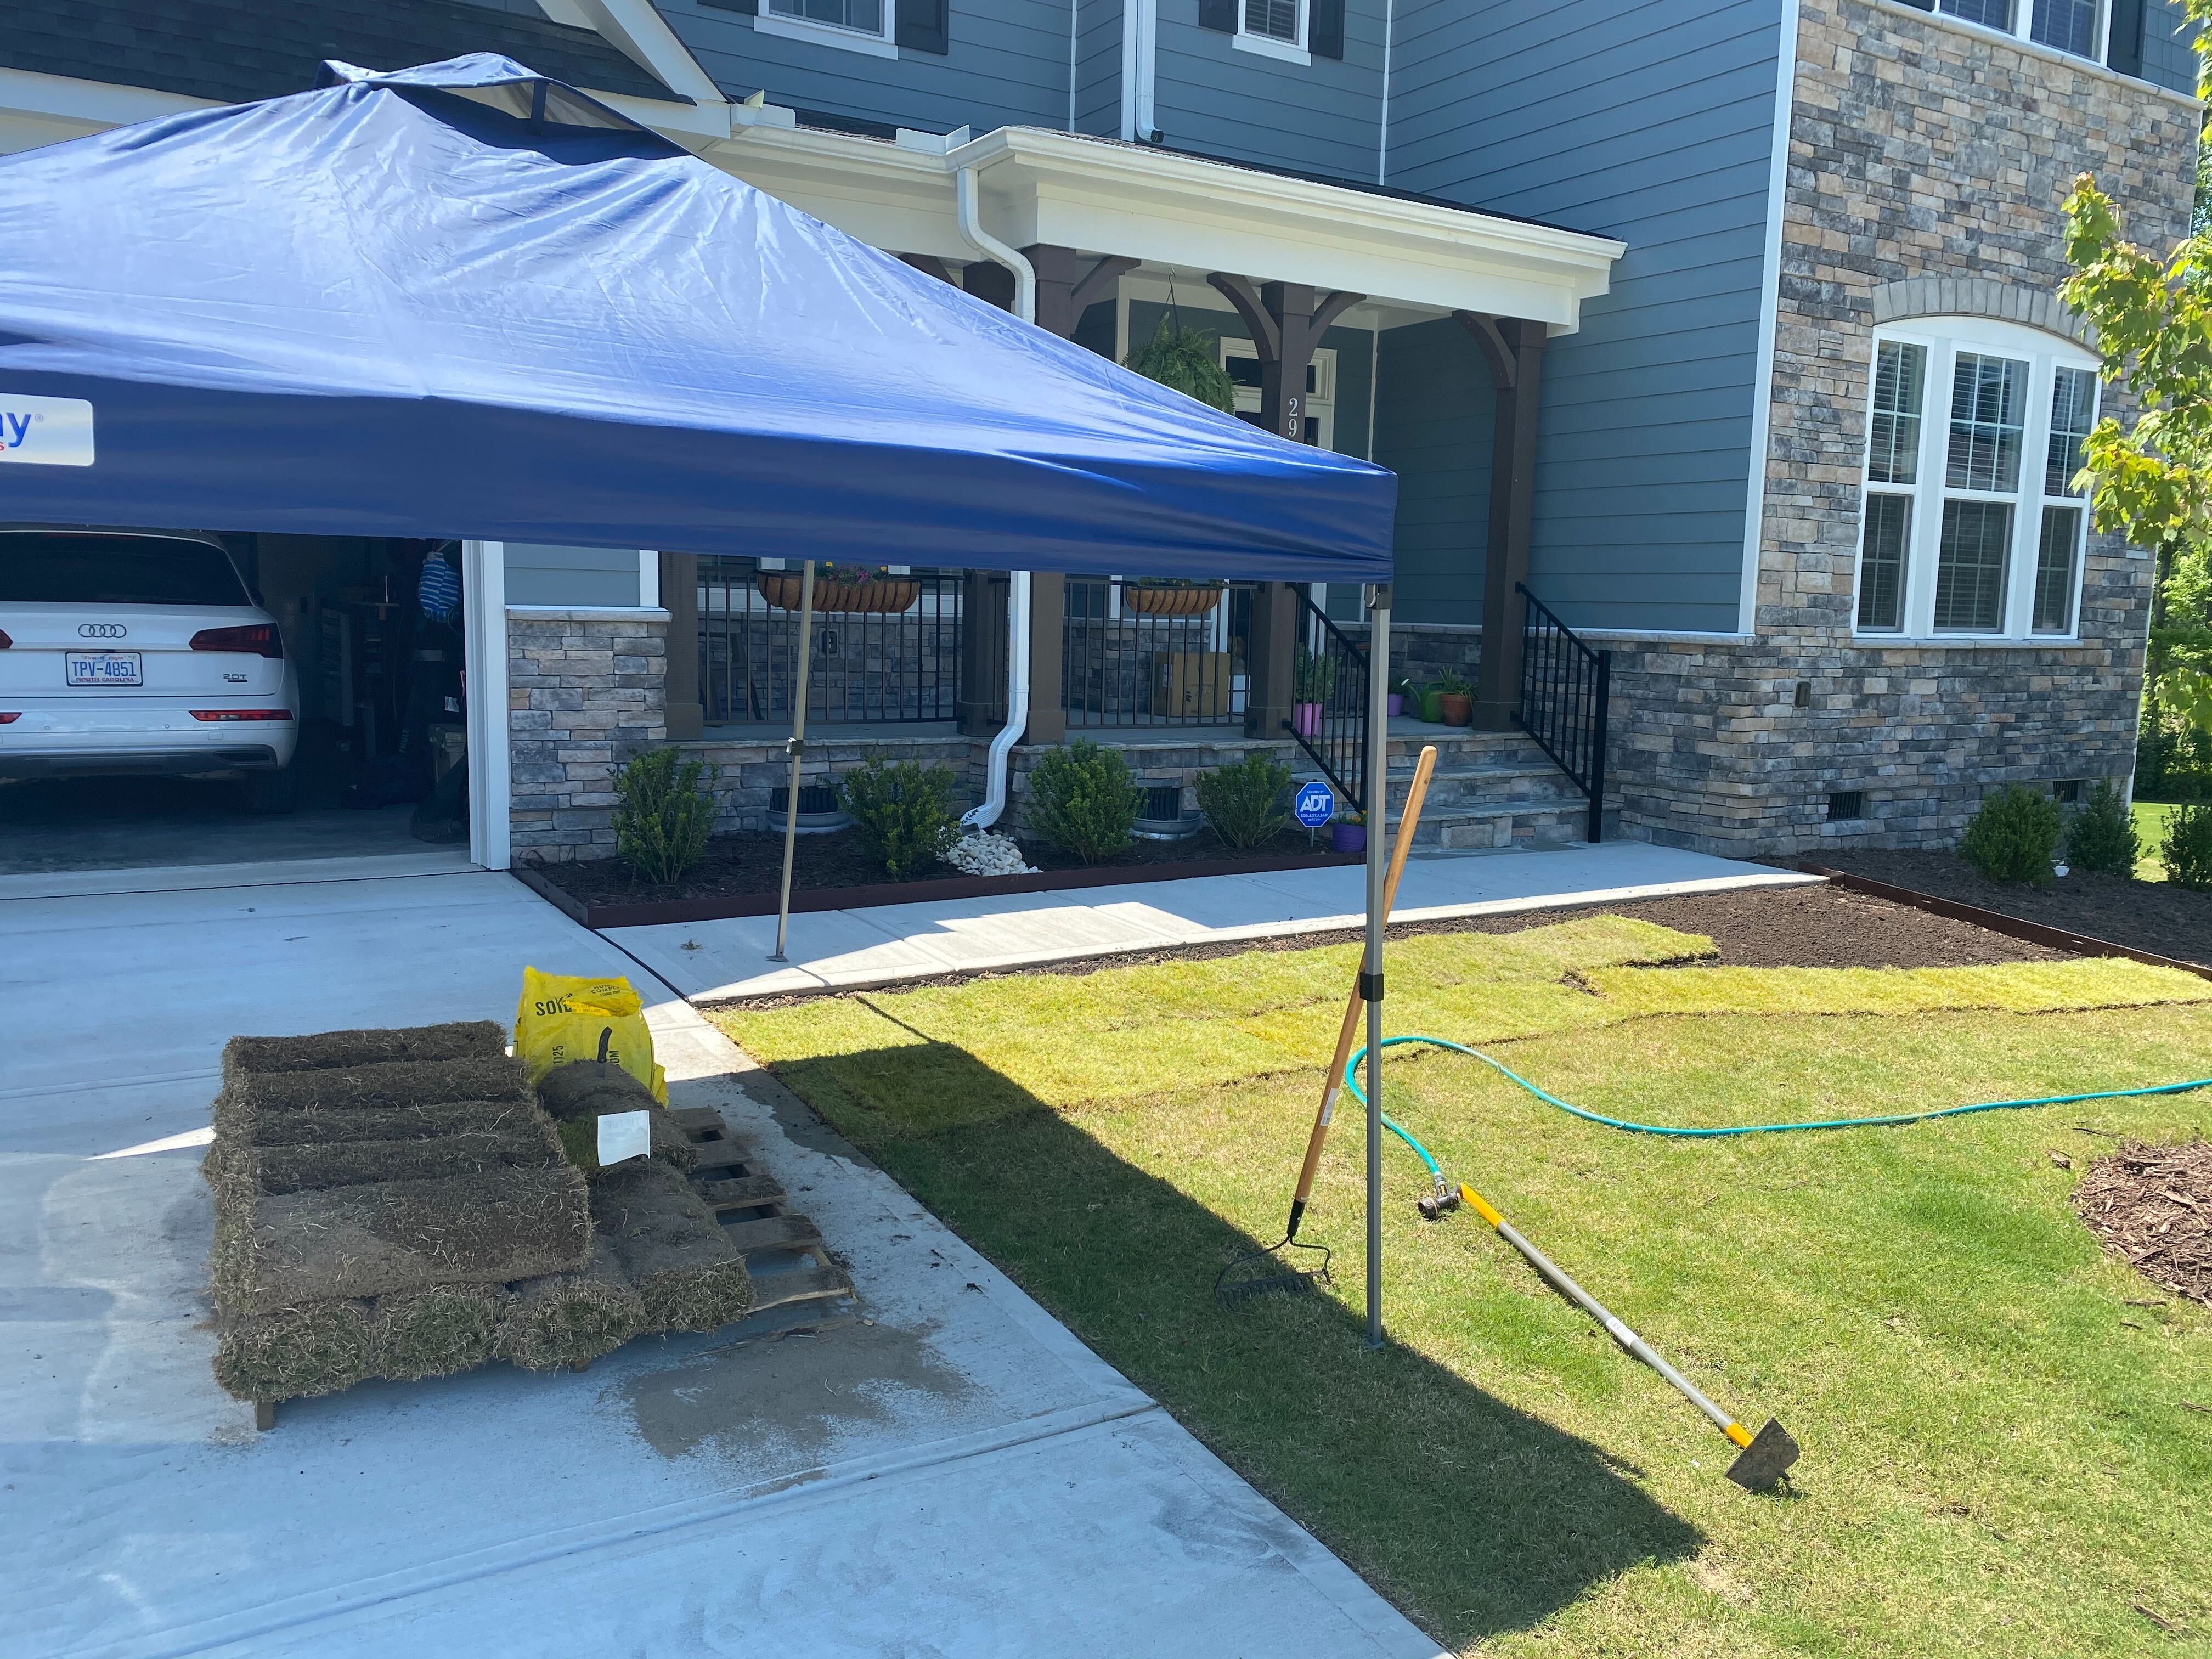 a temporary solution for storing sod in shade is using a tent or canopy